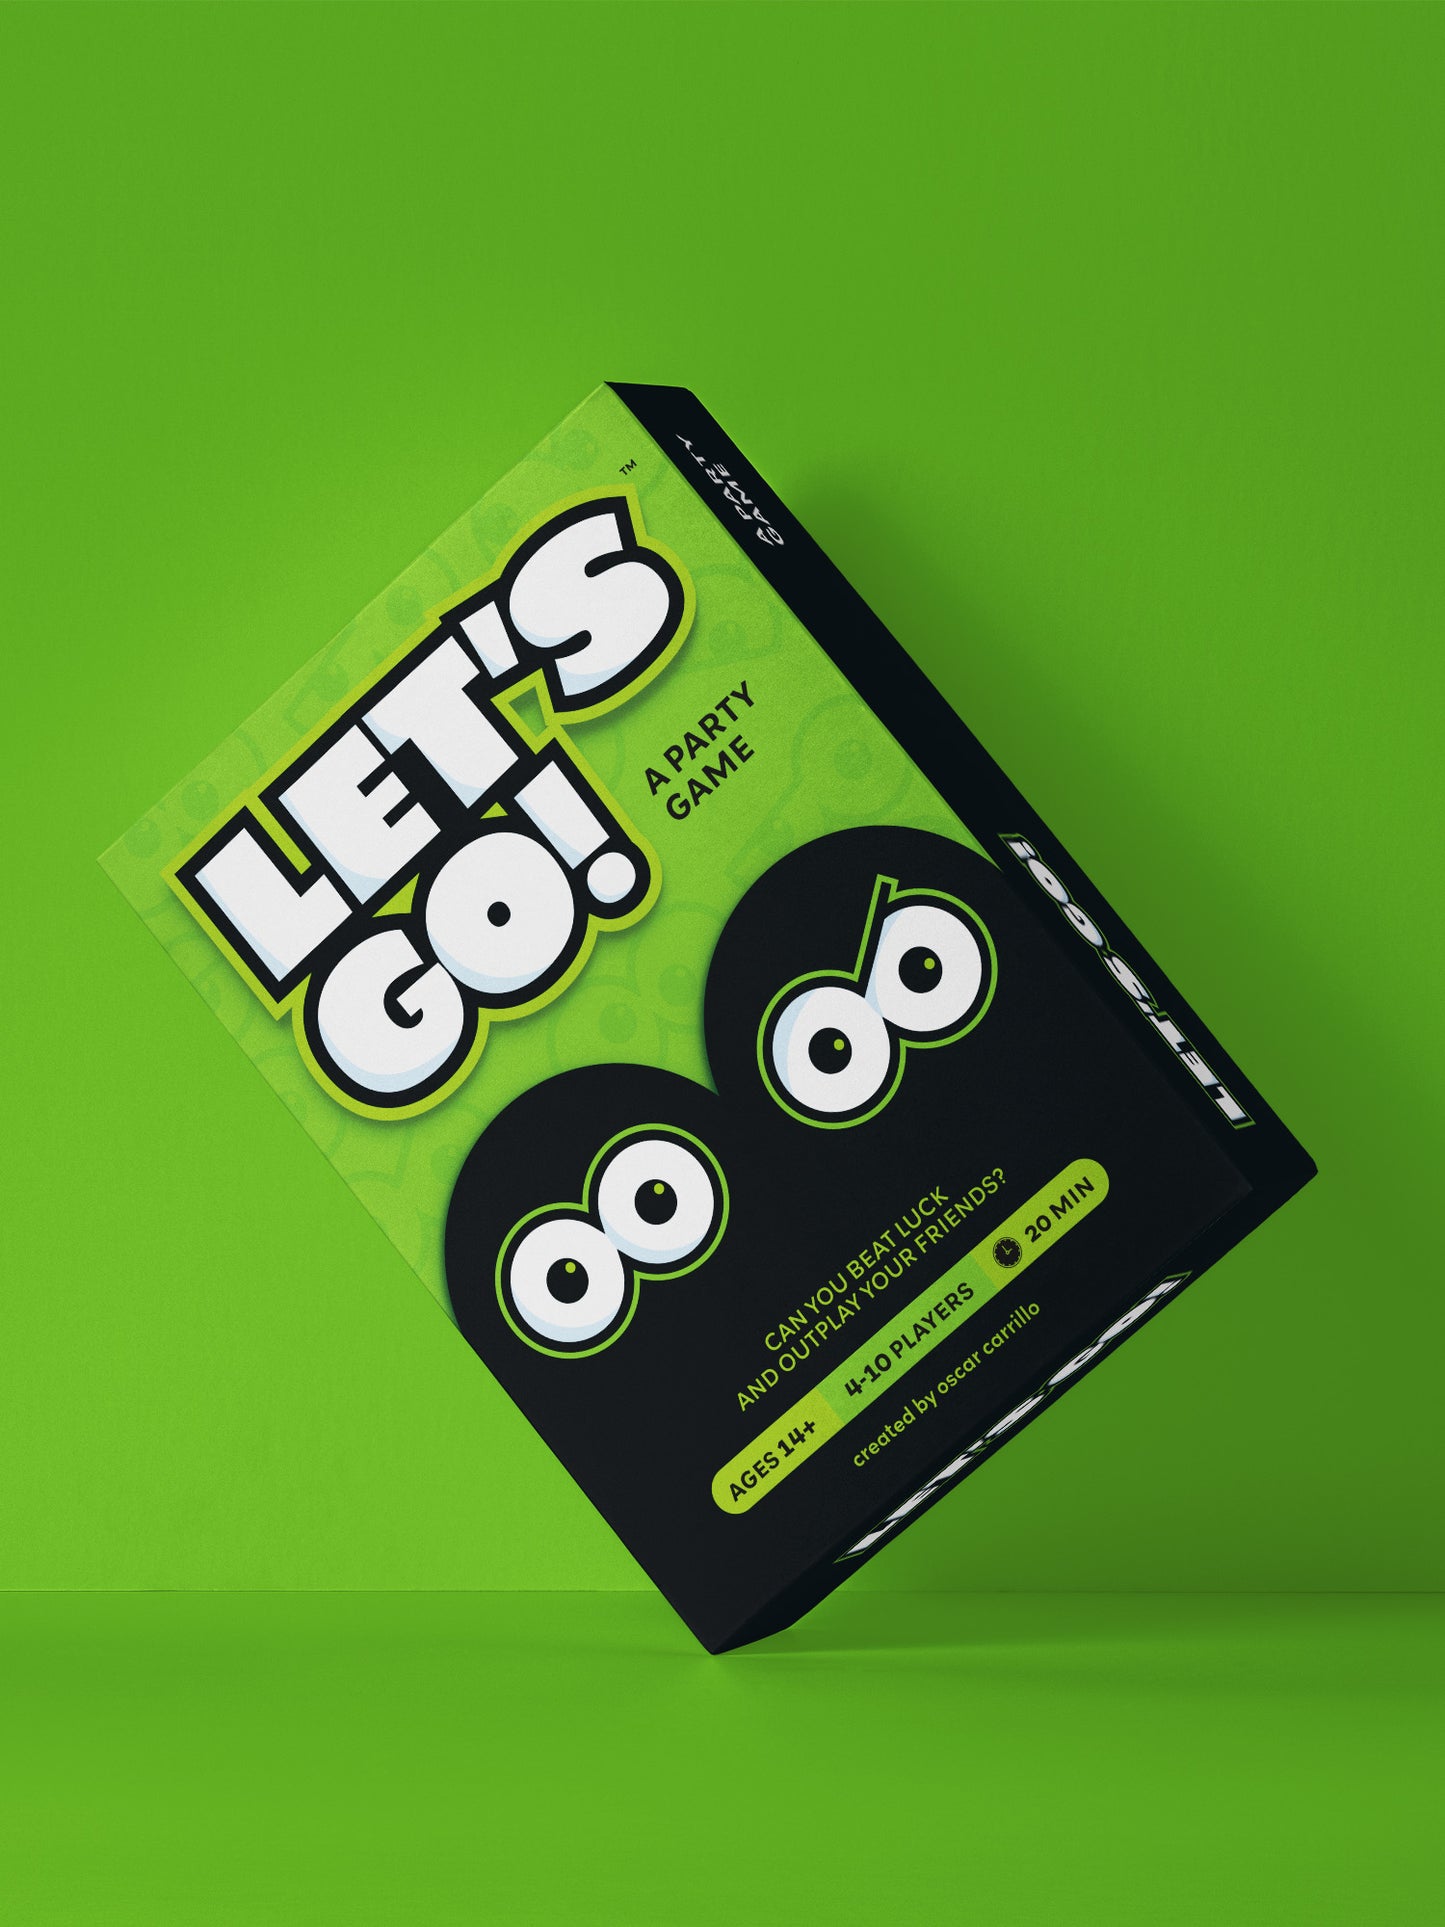 LET'S GO! PARTY CARD | FIRST EDITION GAME BOX